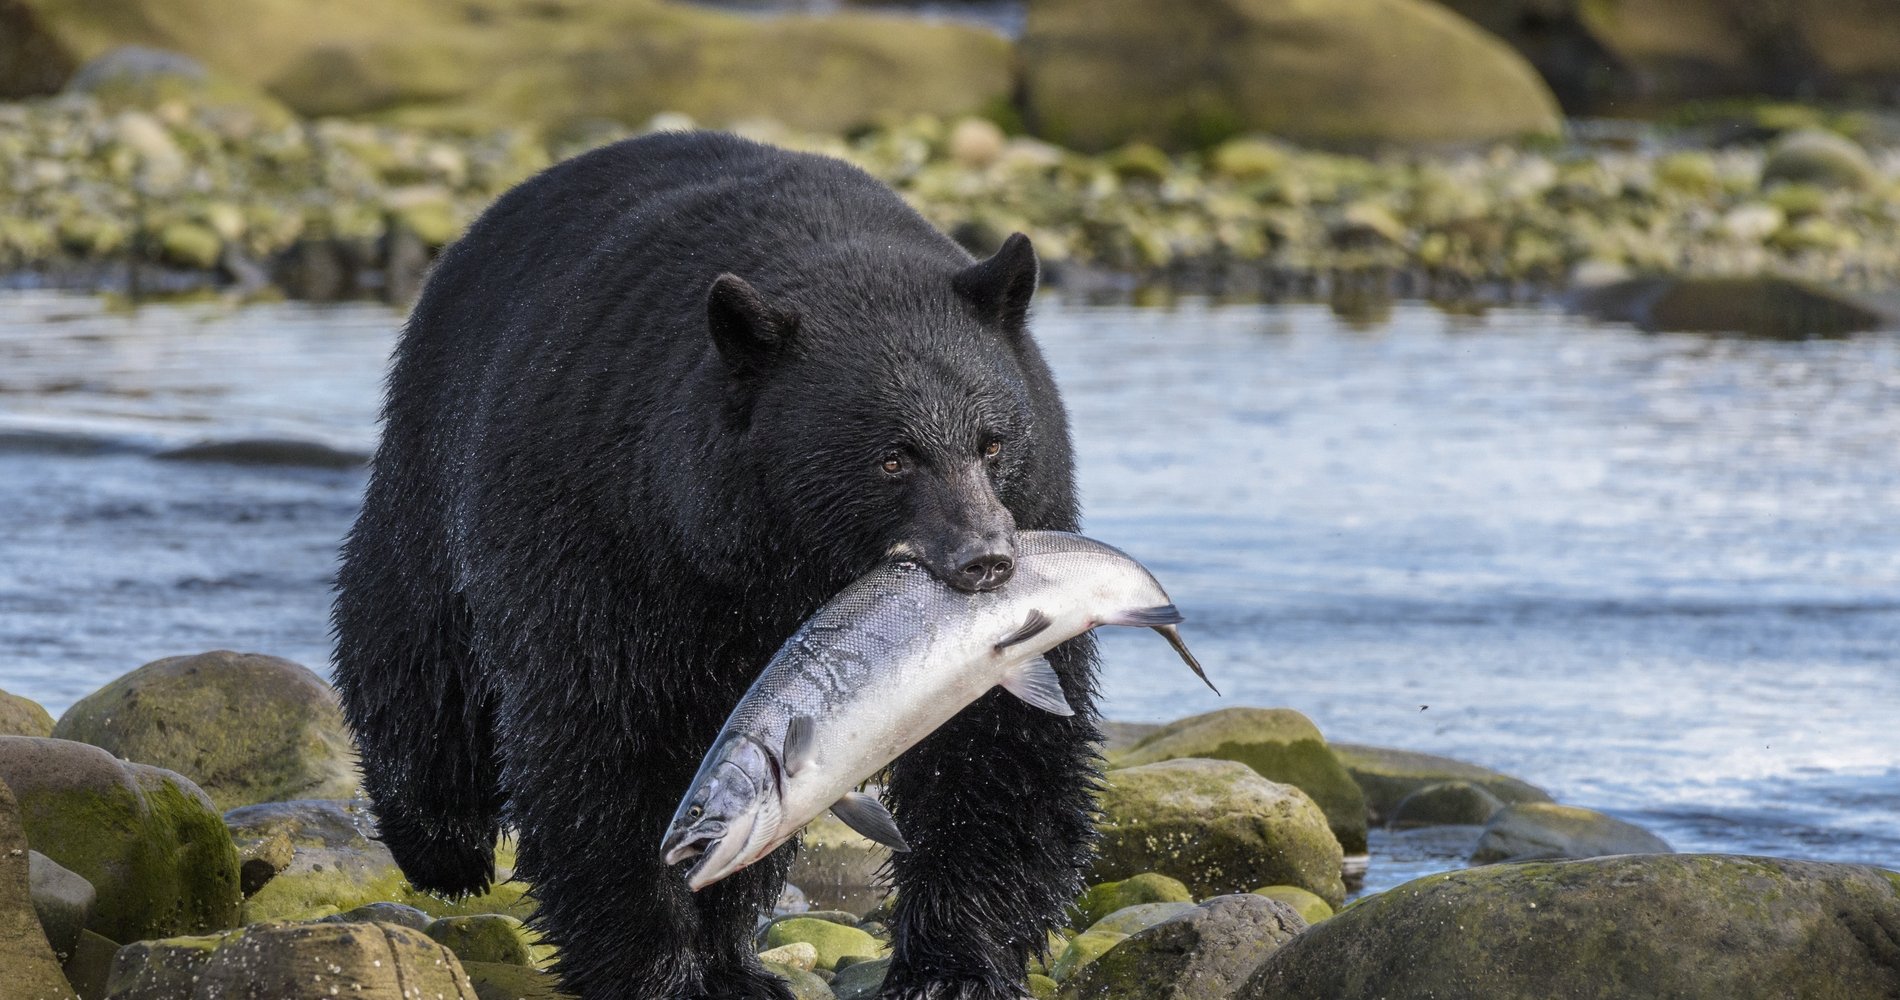 Black bear walks across the rocks beside a body of water with a big silver fish in its mouth